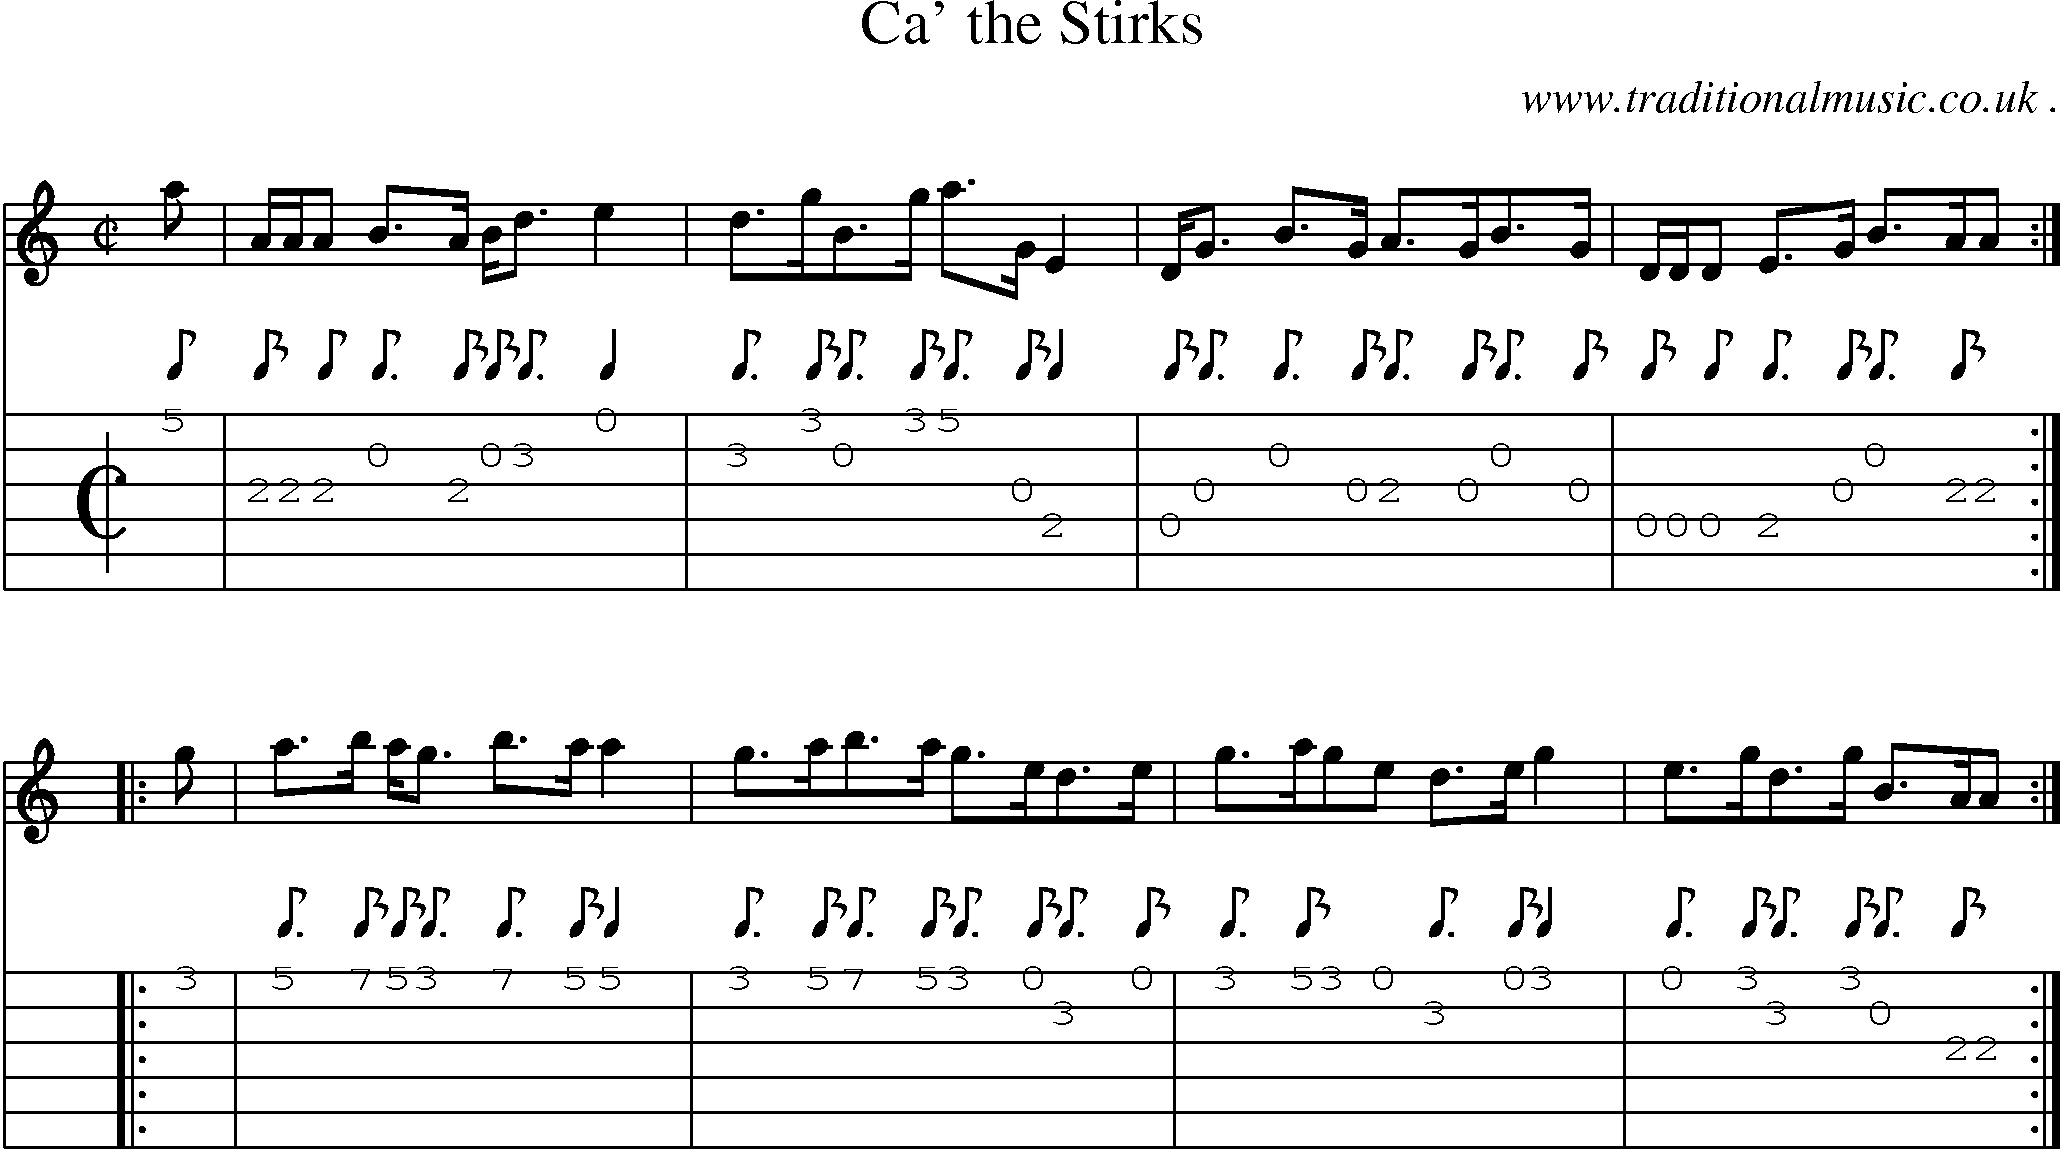 Sheet-music  score, Chords and Guitar Tabs for Ca The Stirks